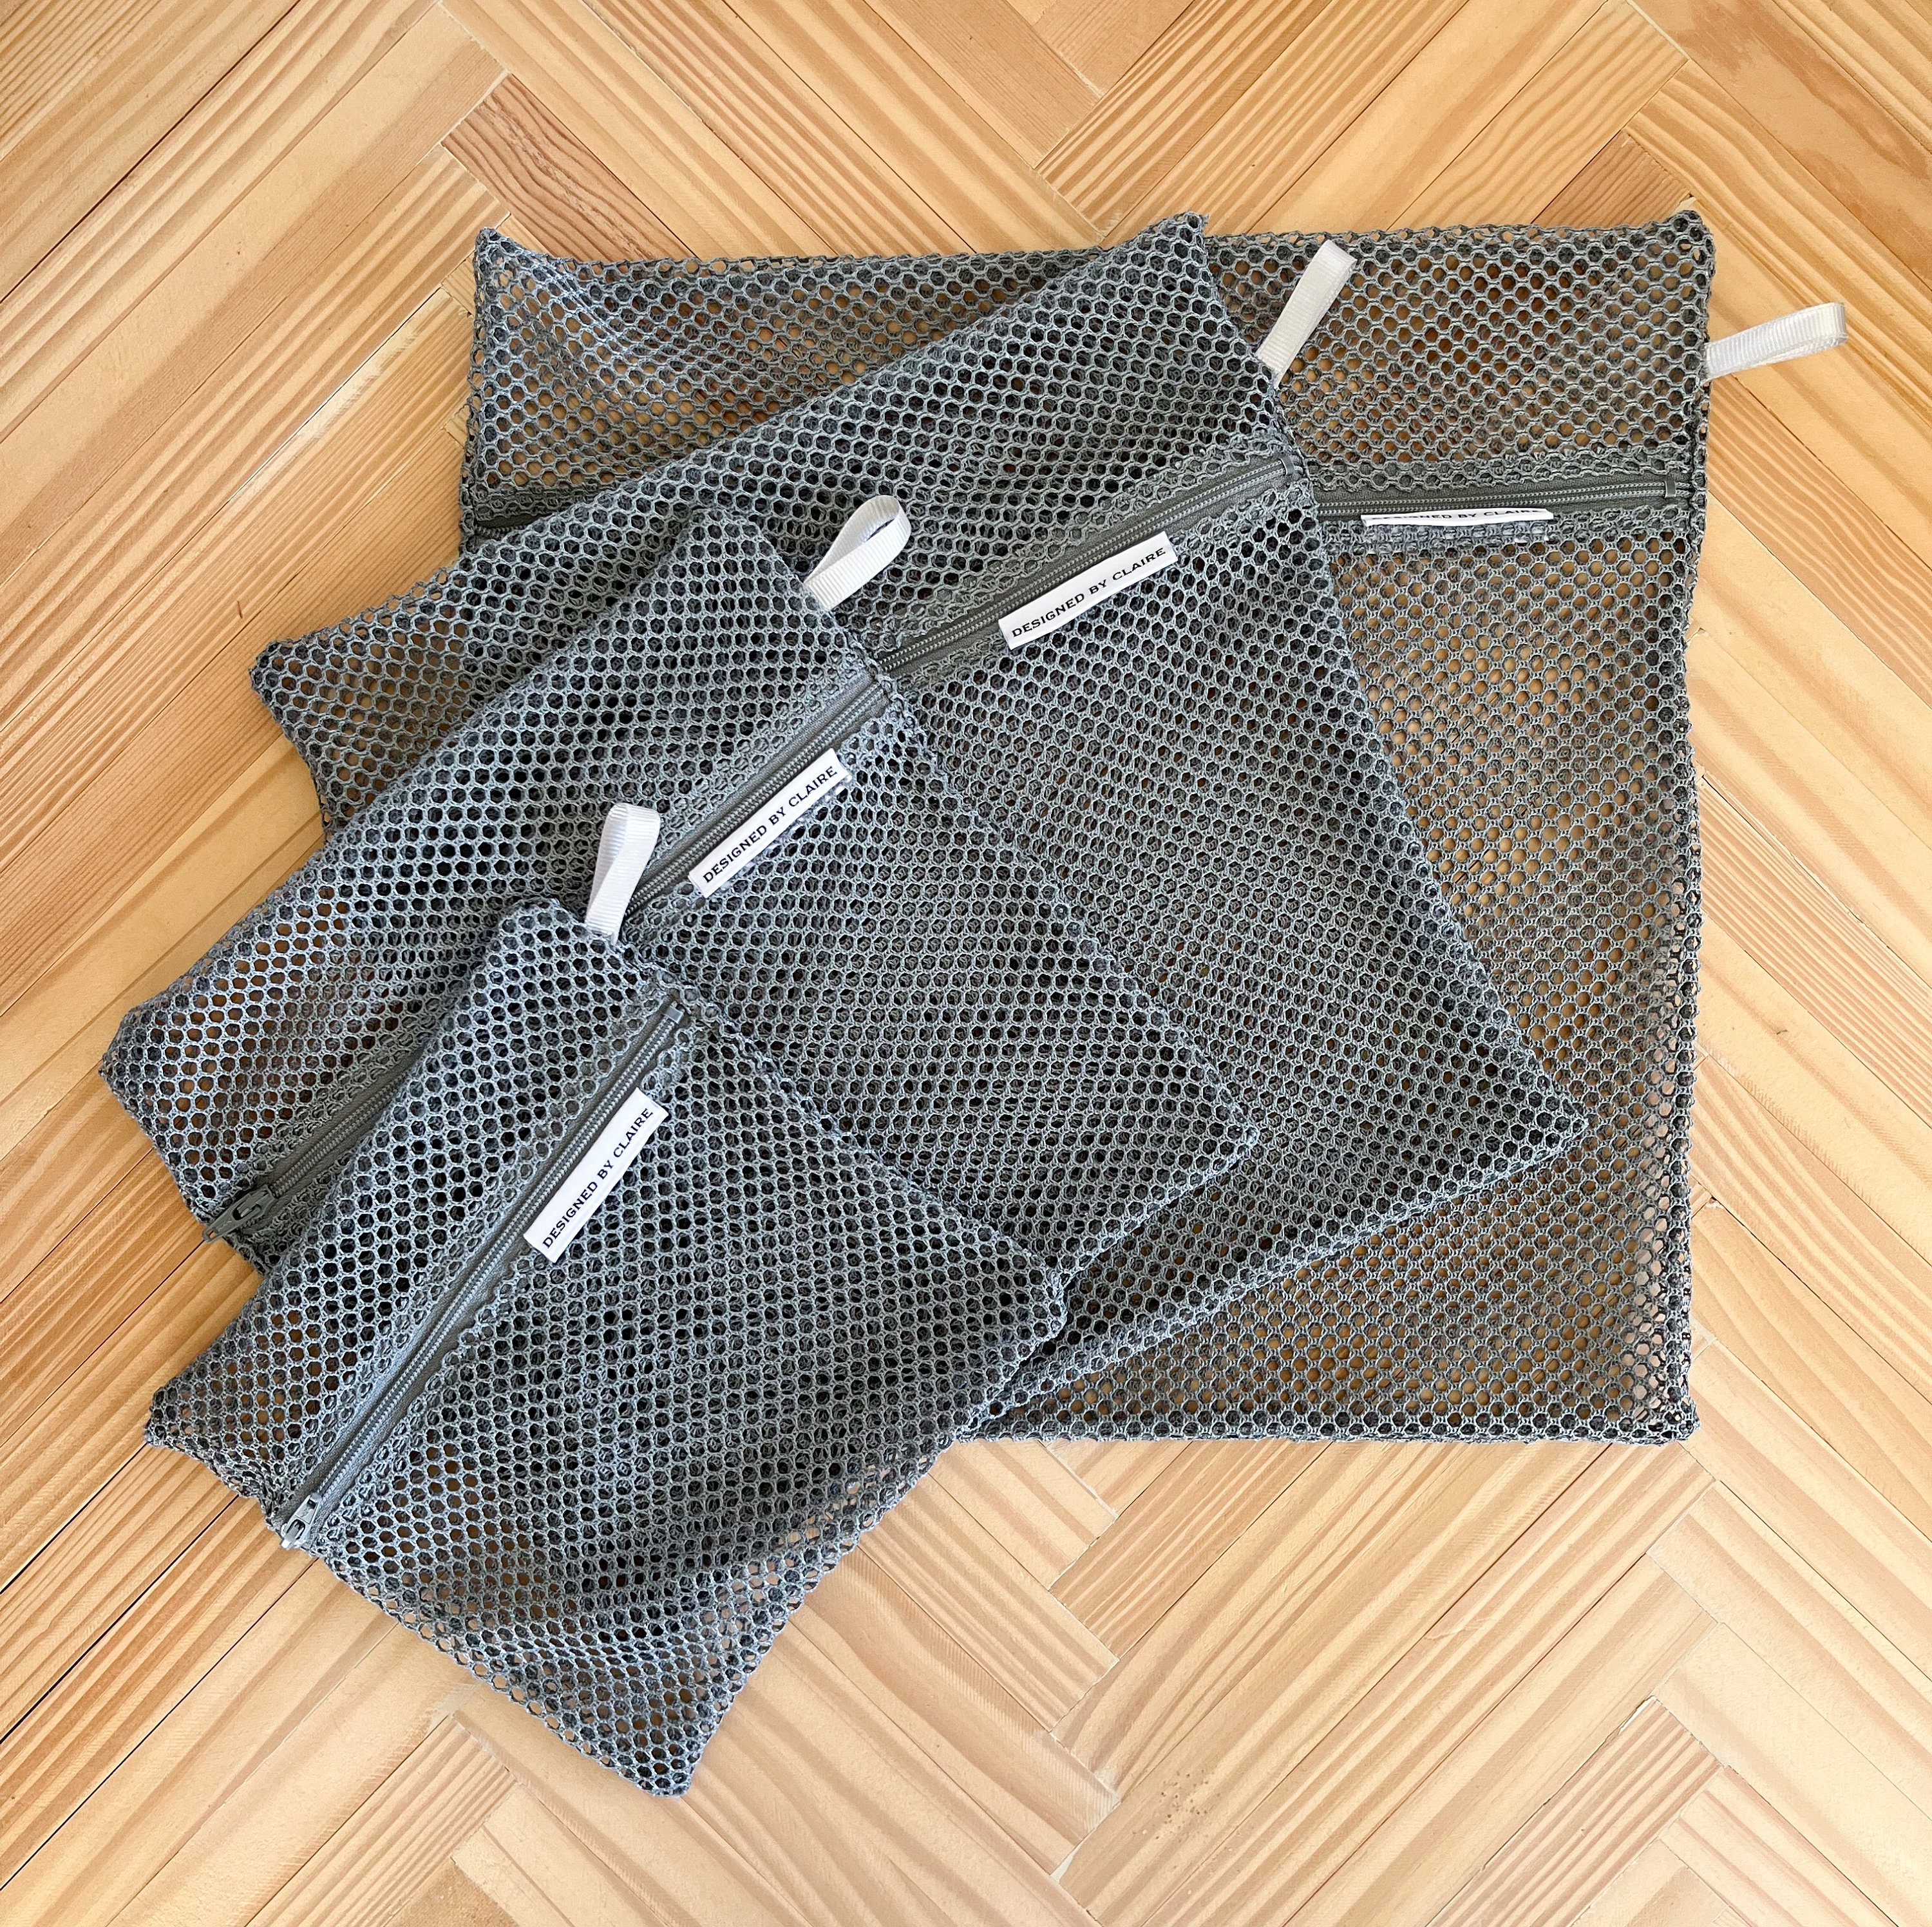 Premium Fine Mesh Laundry Bags to Protect Your Fabrics